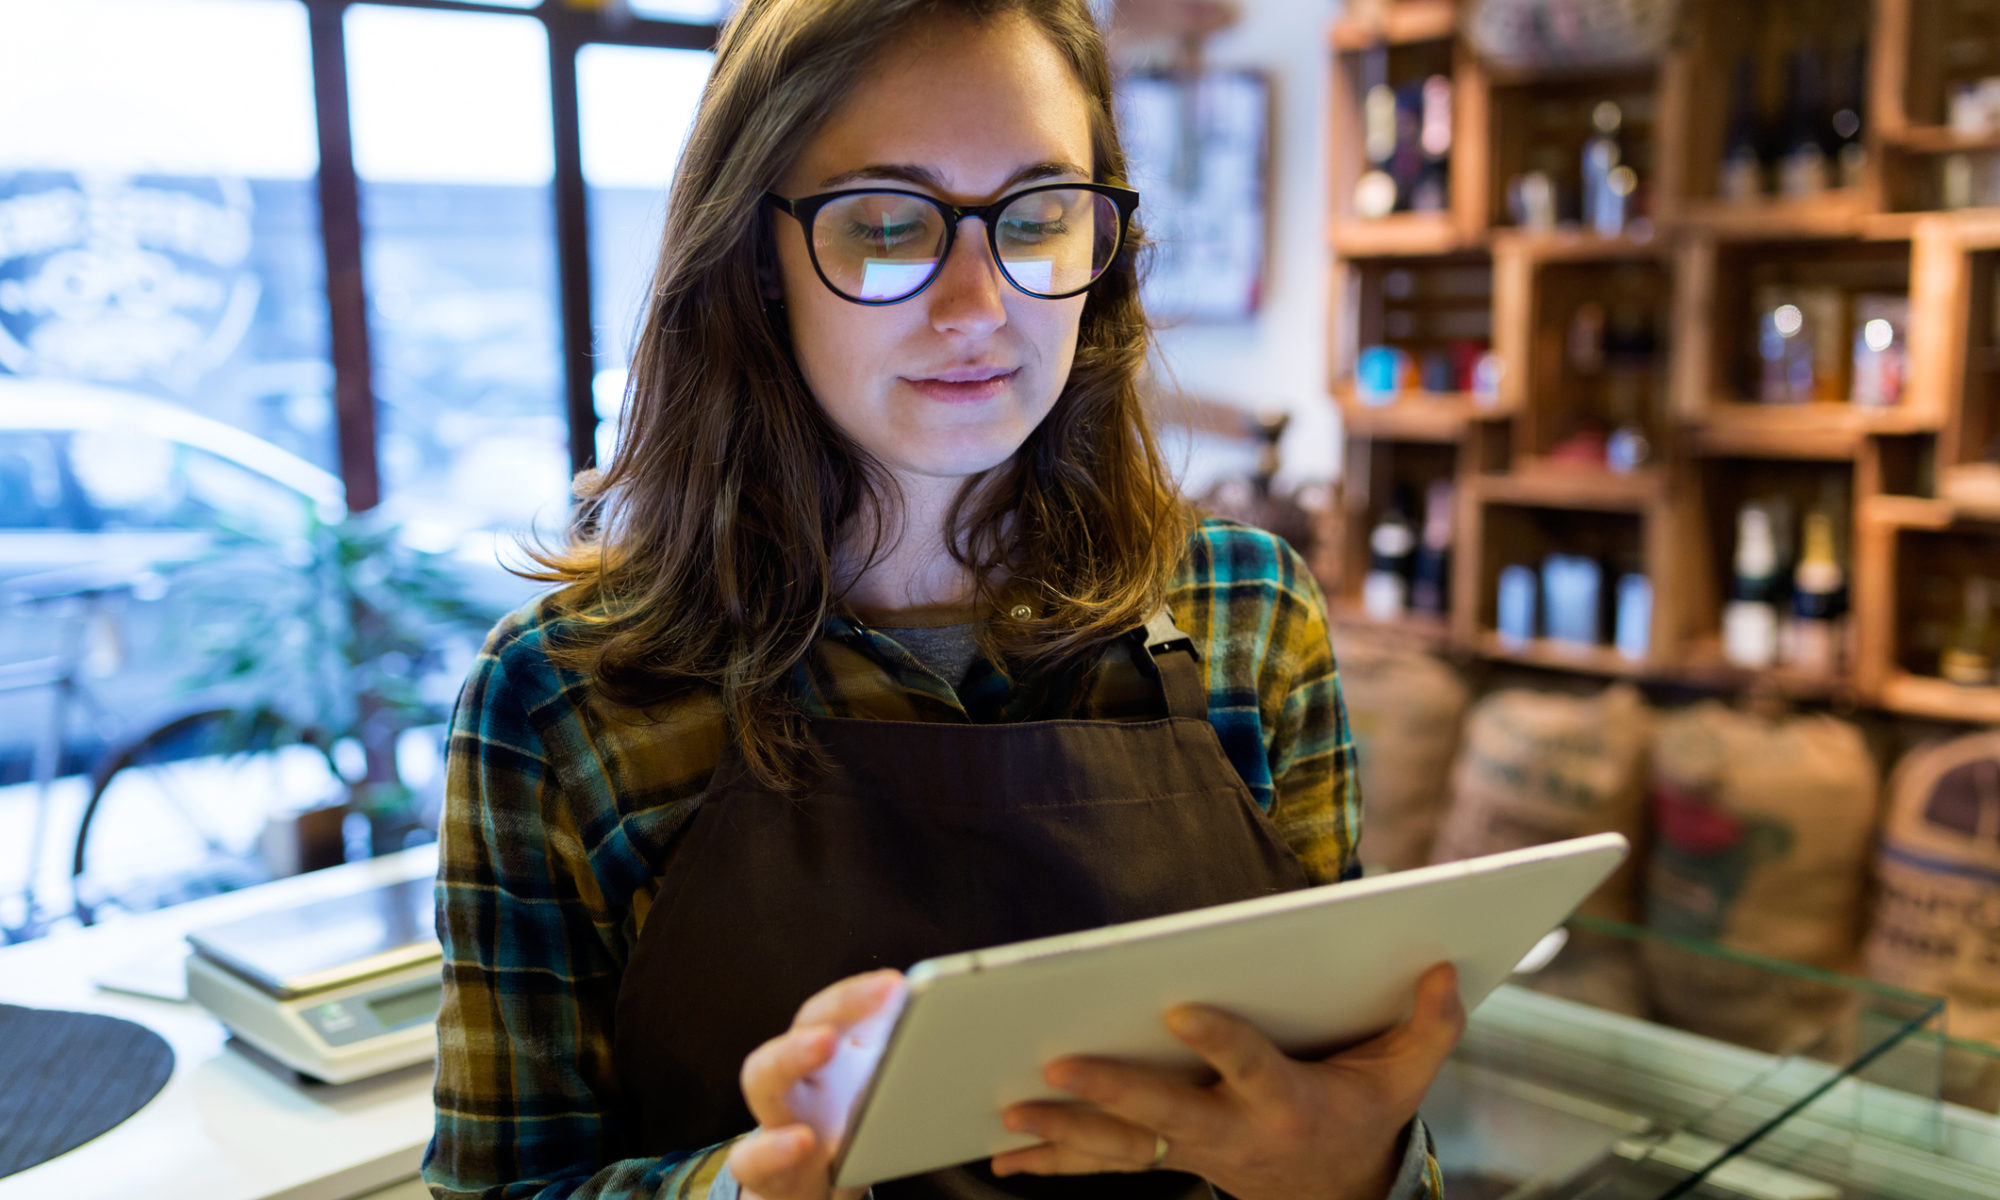 Female small business owner stood in the middle of her shop updating her online store via a tablet device. She is wearing dark green clothing and glasses